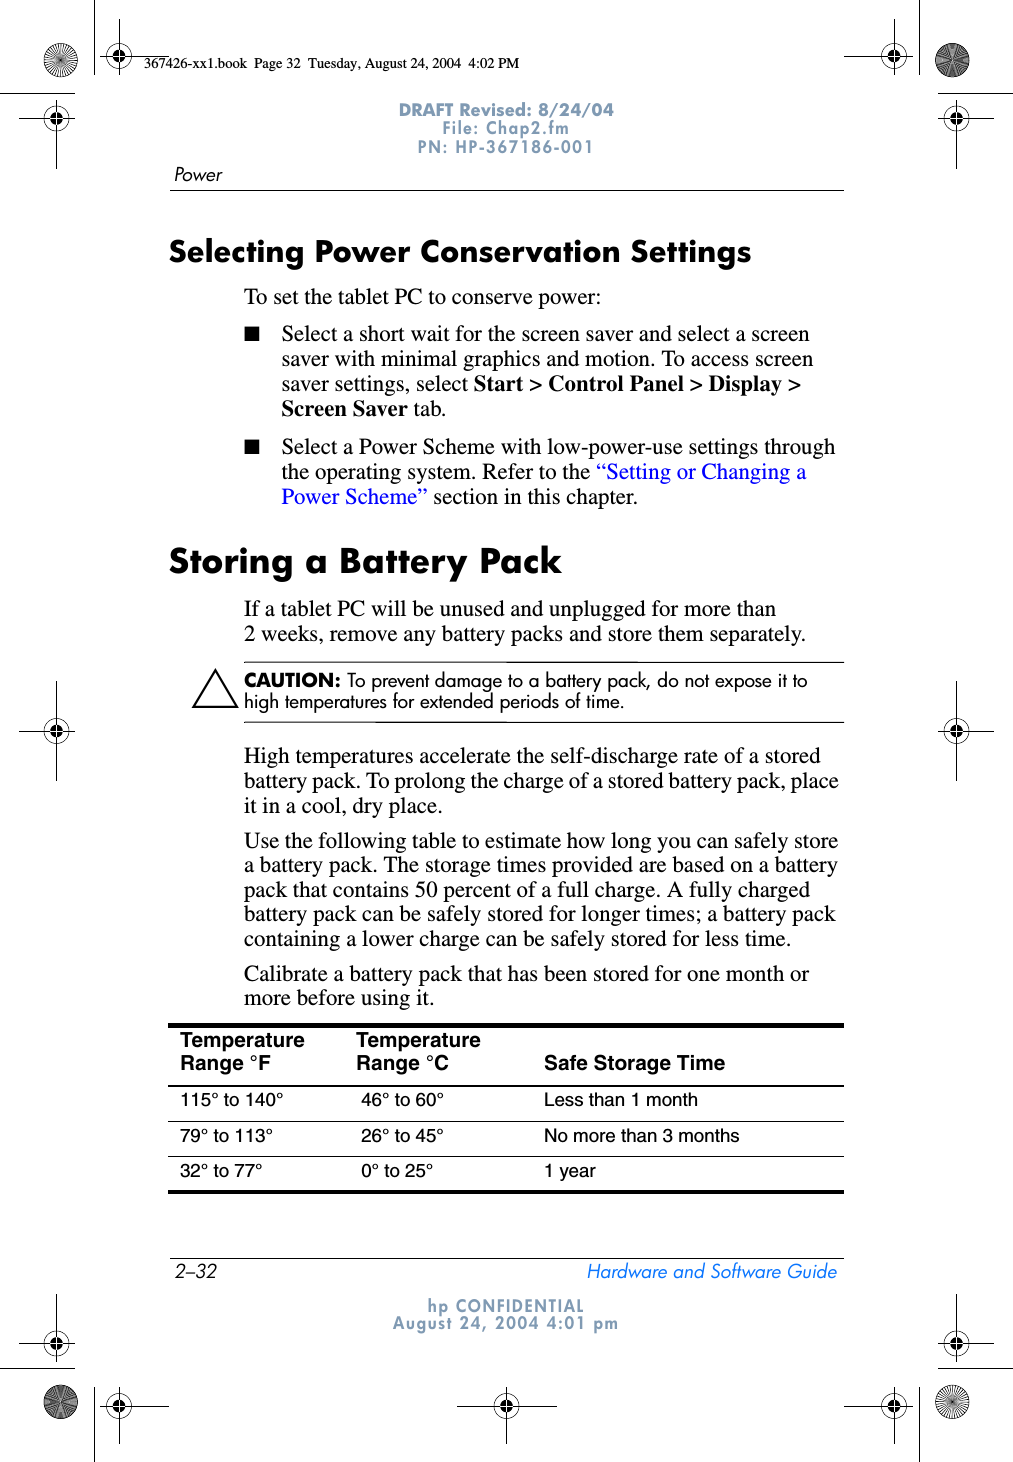 2–32 Hardware and Software GuidePowerDRAFT Revised: 8/24/04File: Chap2.fm PN: HP-367186-001 hp CONFIDENTIALAugust 24, 2004 4:01 pmSelecting Power Conservation SettingsTo set the tablet PC to conserve power:■Select a short wait for the screen saver and select a screen saver with minimal graphics and motion. To access screen saver settings, select Start &gt; Control Panel &gt; Display &gt; Screen Saver tab.■Select a Power Scheme with low-power-use settings through the operating system. Refer to the “Setting or Changing a Power Scheme” section in this chapter.Storing a Battery PackIf a tablet PC will be unused and unplugged for more than 2 weeks, remove any battery packs and store them separately.ÄCAUTION: To prevent damage to a battery pack, do not expose it to high temperatures for extended periods of time.High temperatures accelerate the self-discharge rate of a stored battery pack. To prolong the charge of a stored battery pack, place it in a cool, dry place.Use the following table to estimate how long you can safely store a battery pack. The storage times provided are based on a battery pack that contains 50 percent of a full charge. A fully charged battery pack can be safely stored for longer times; a battery pack containing a lower charge can be safely stored for less time.Calibrate a battery pack that has been stored for one month or more before using it.Temperature Range °F Temperature Range °C Safe Storage Time115° to 140°  46° to 60° Less than 1 month79° to 113°  26° to 45° No more than 3 months32° to 77°  0° to 25° 1 year367426-xx1.book  Page 32  Tuesday, August 24, 2004  4:02 PM